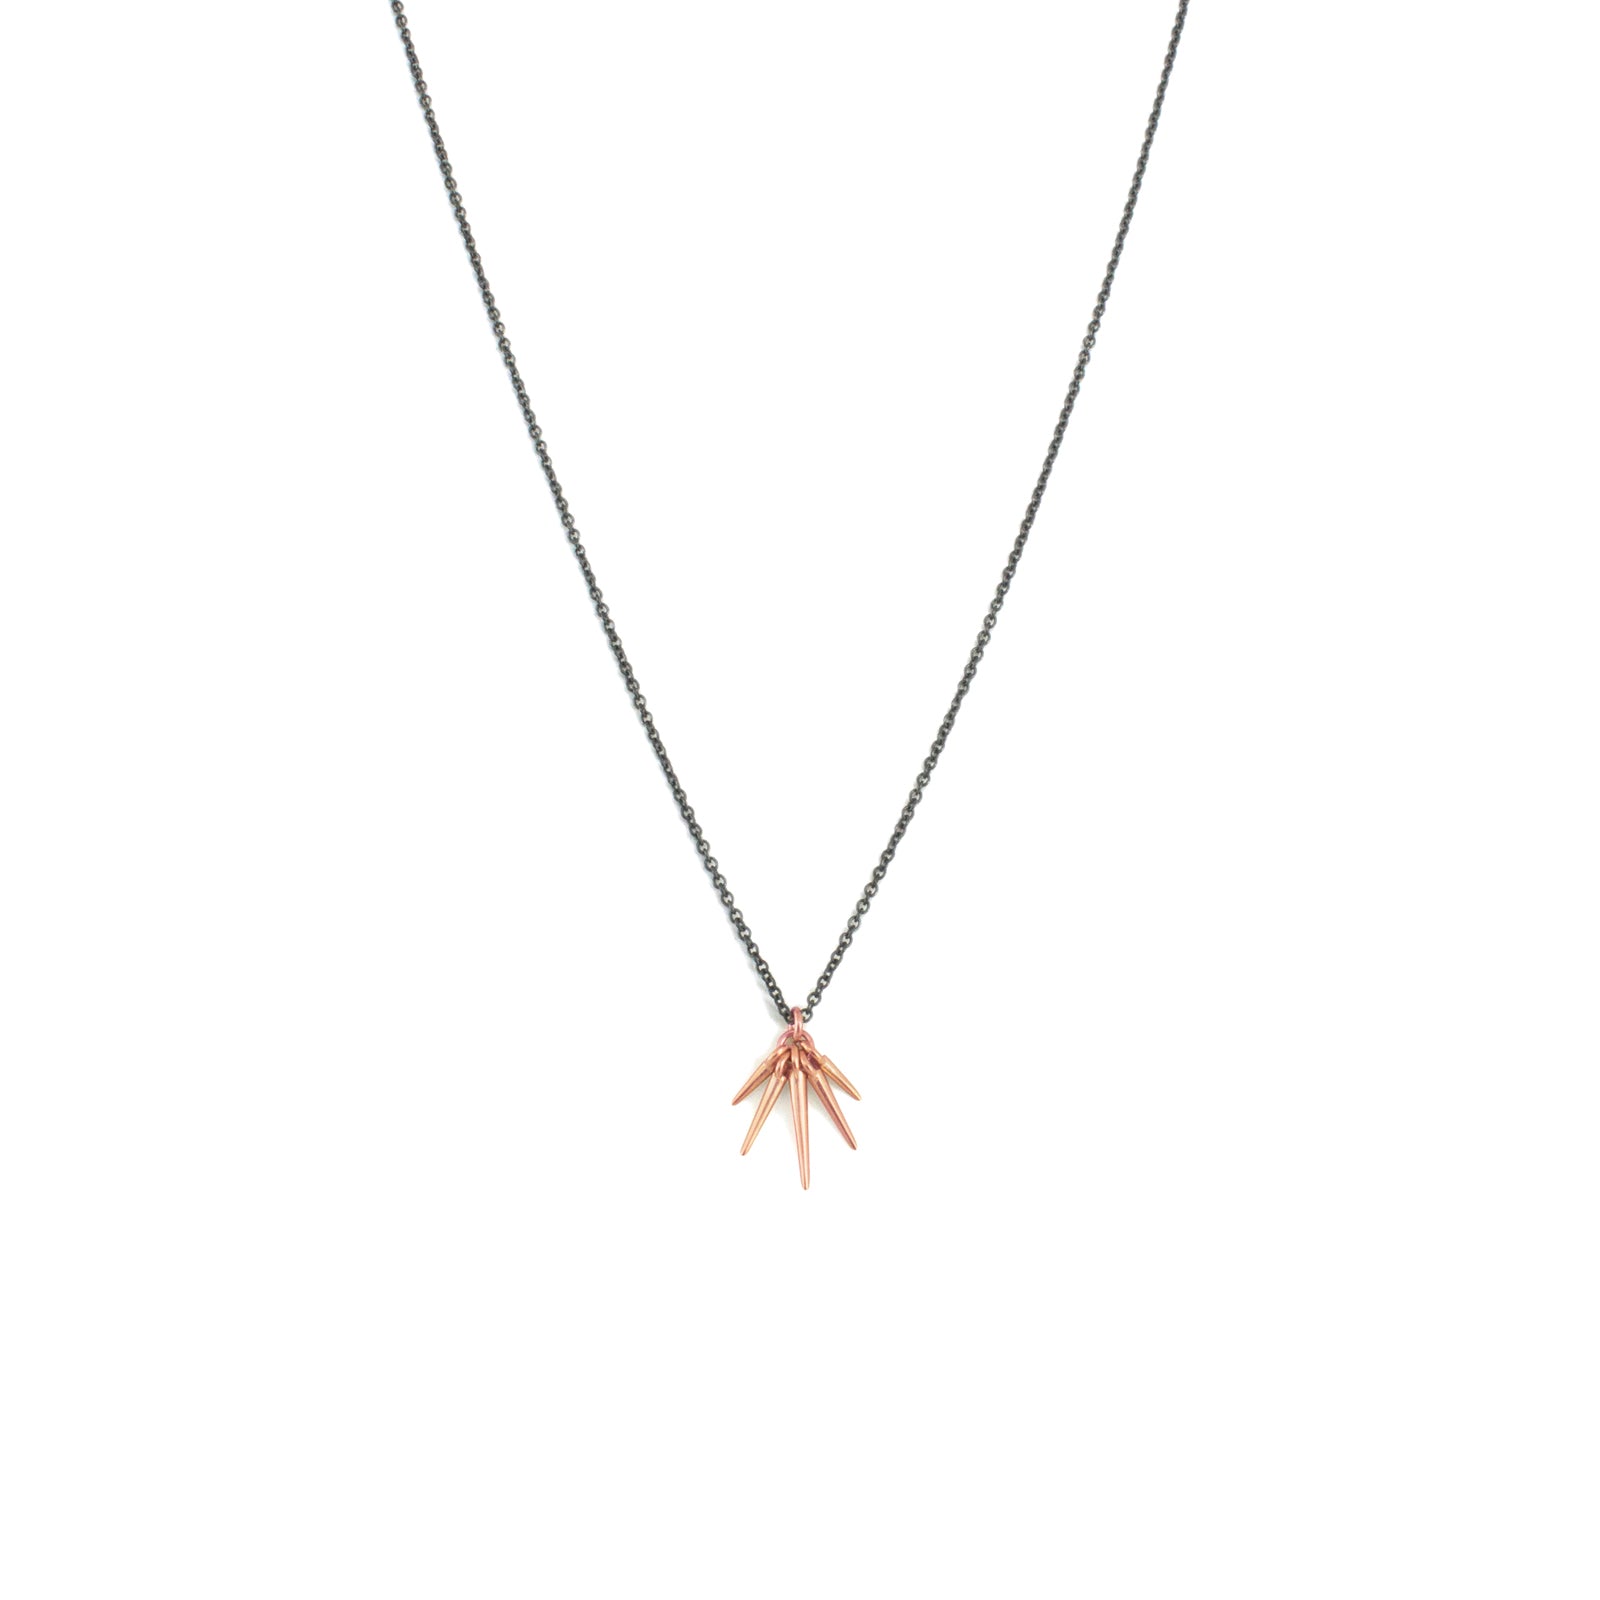 18k rose gold/oxidized silver chain / small fan points necklace